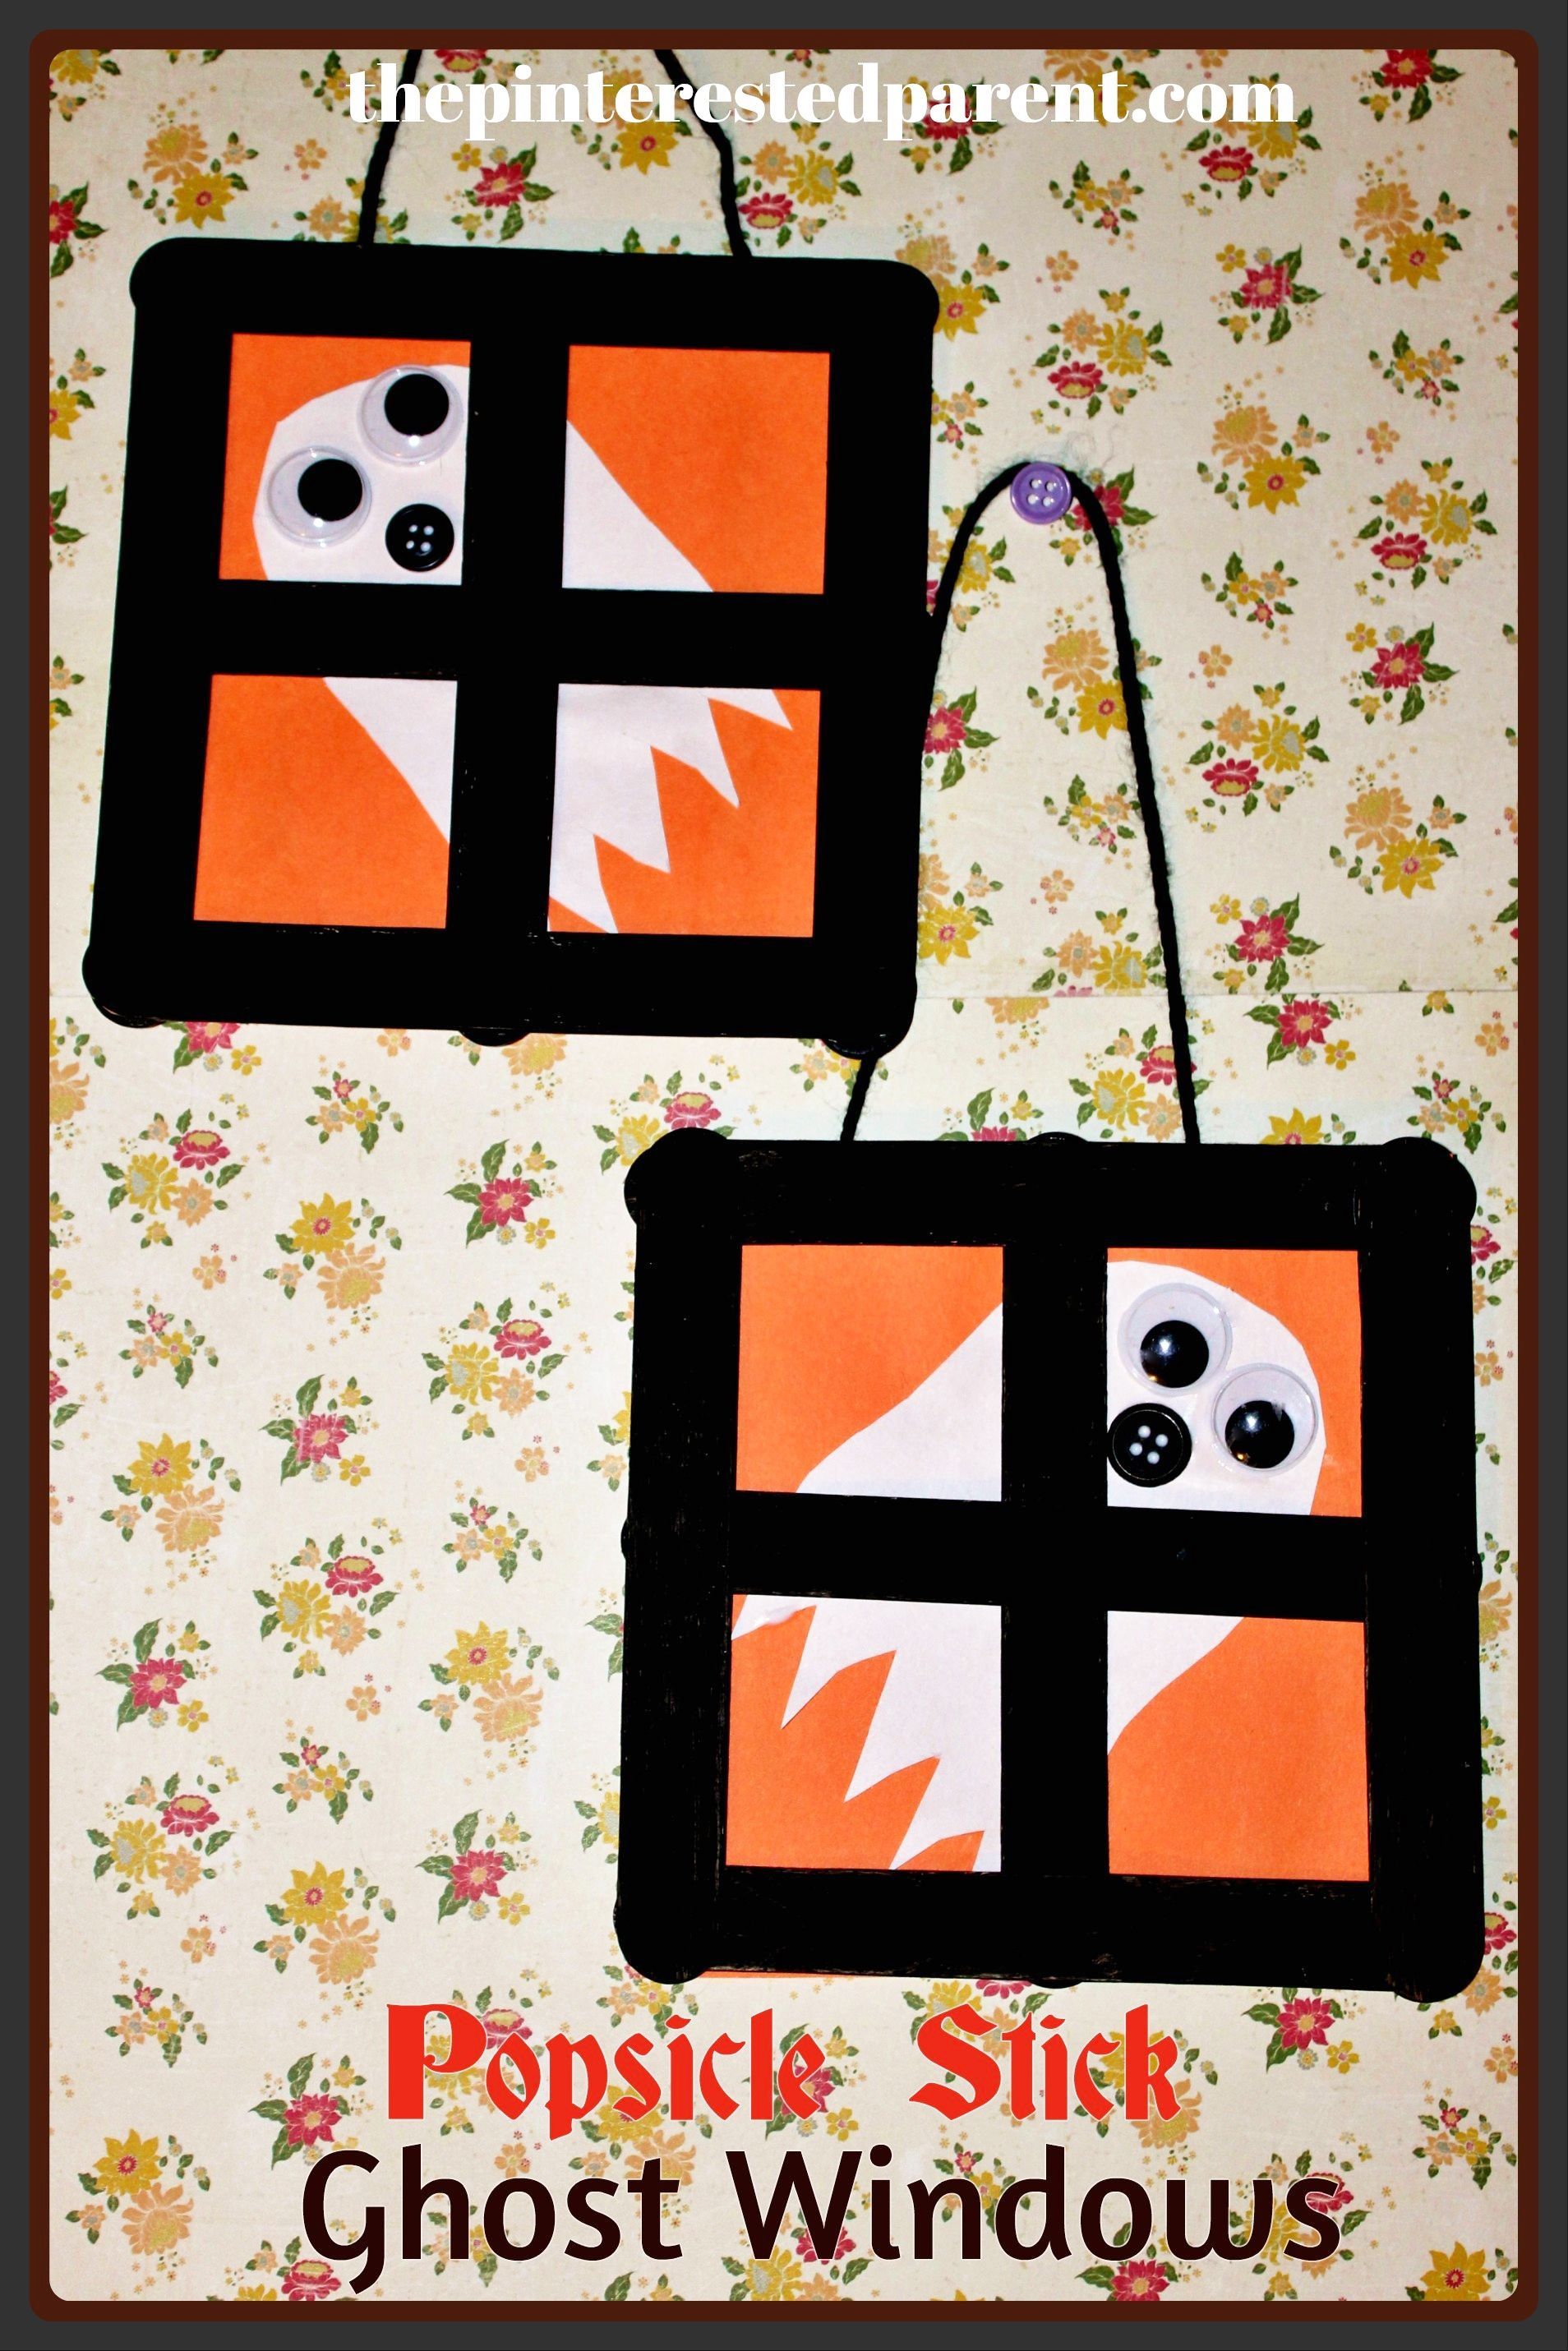 Popsicle Stick Ghost Window Crafts -   25 halloween crafts for school
 ideas